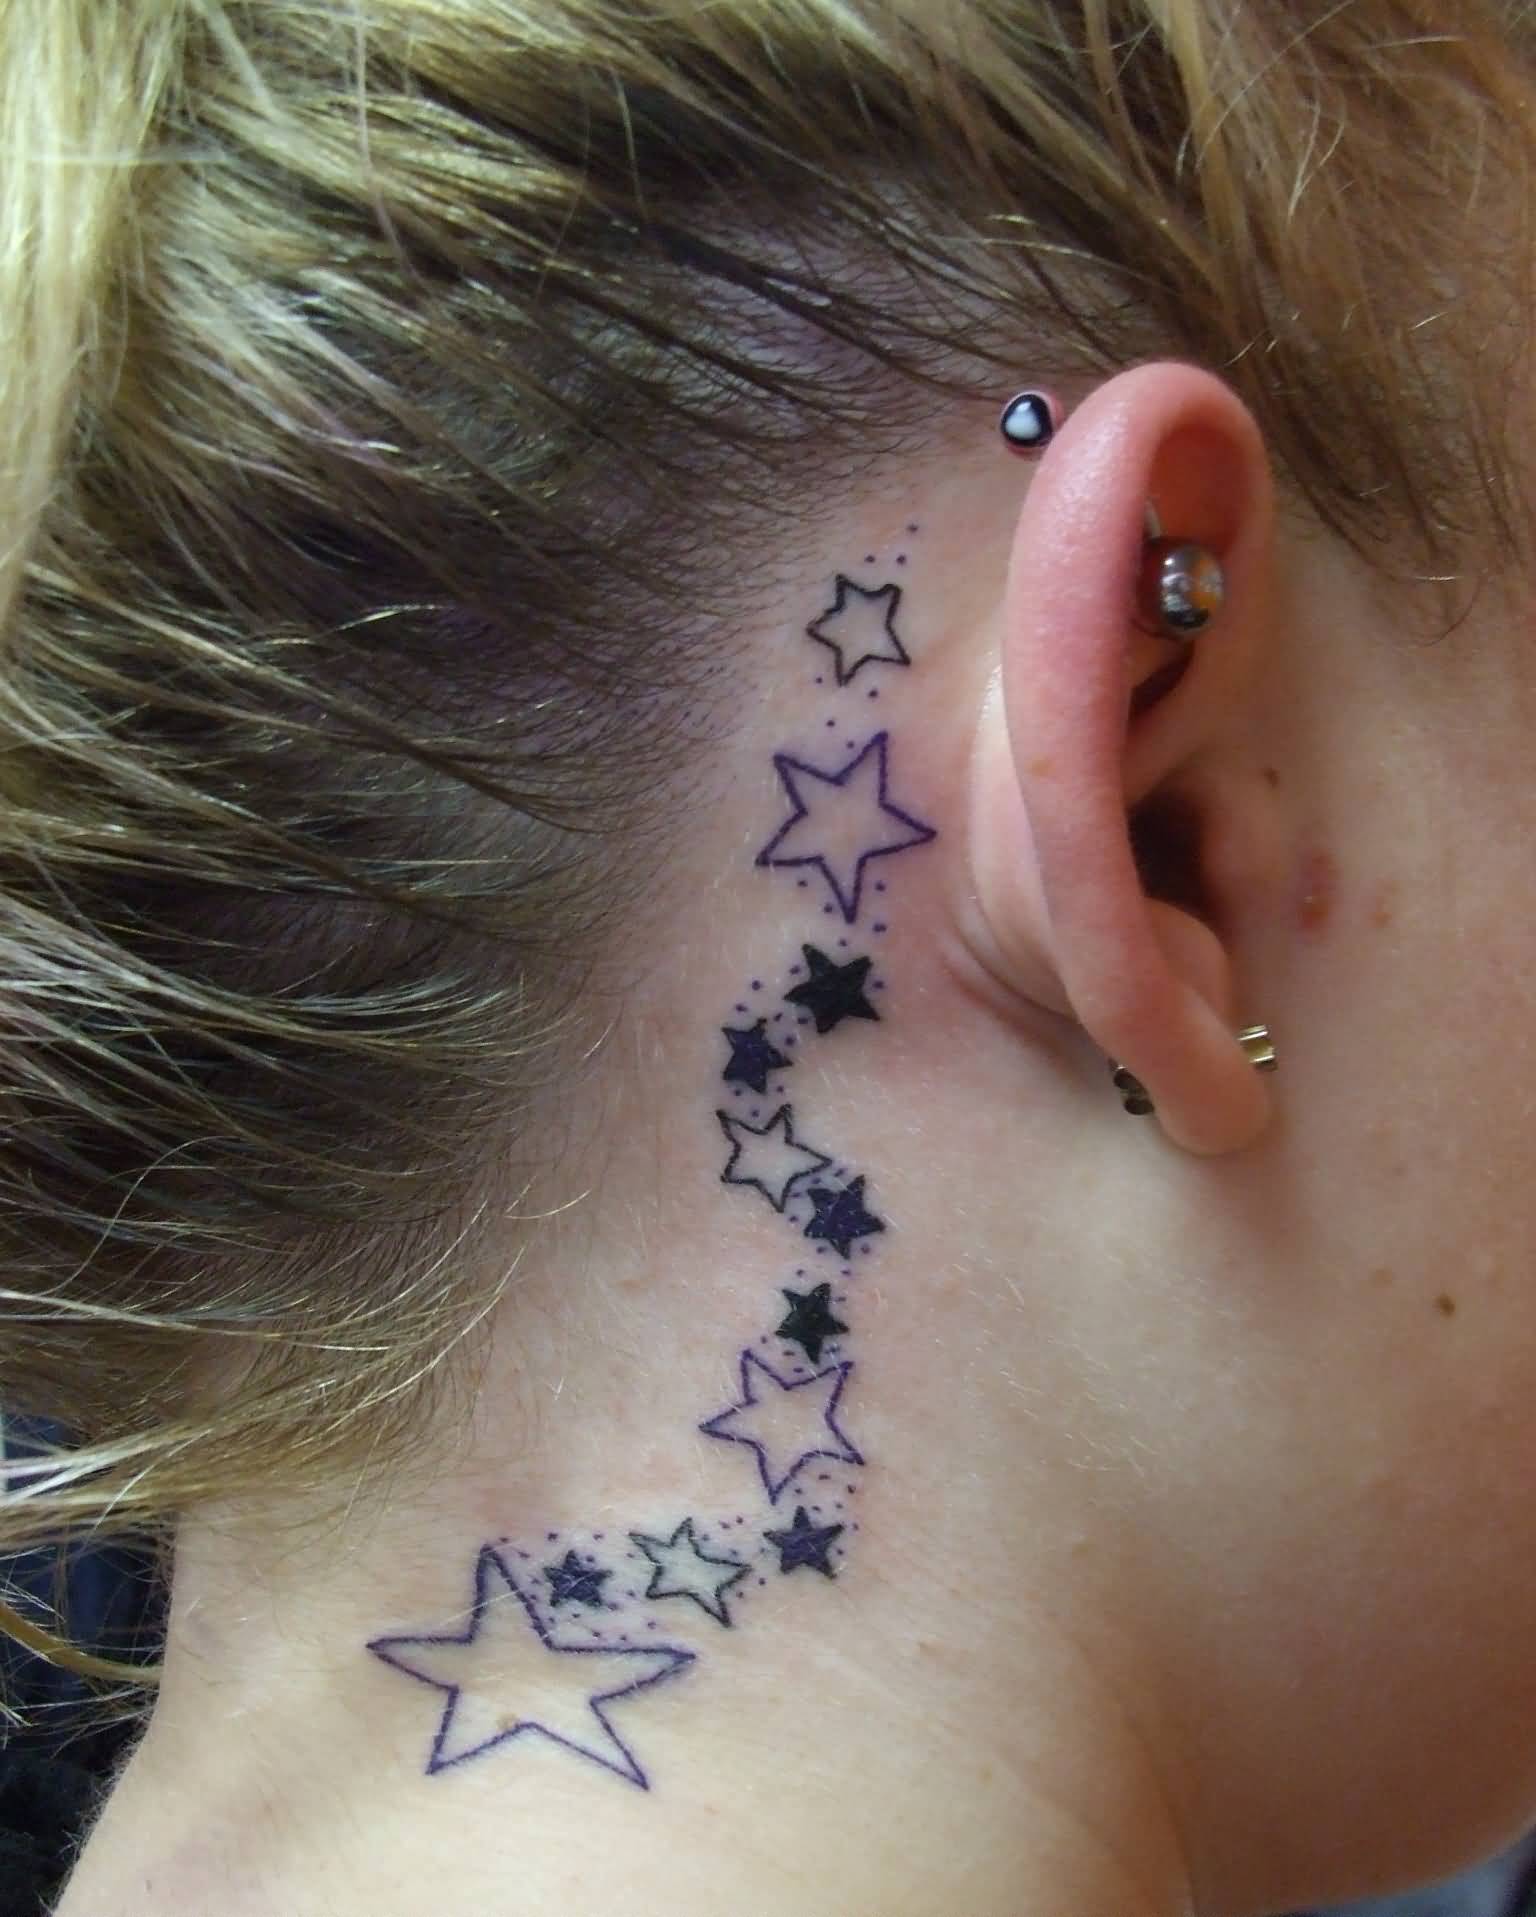 Amazing Outline And Black Star Tattoos Behind Ear